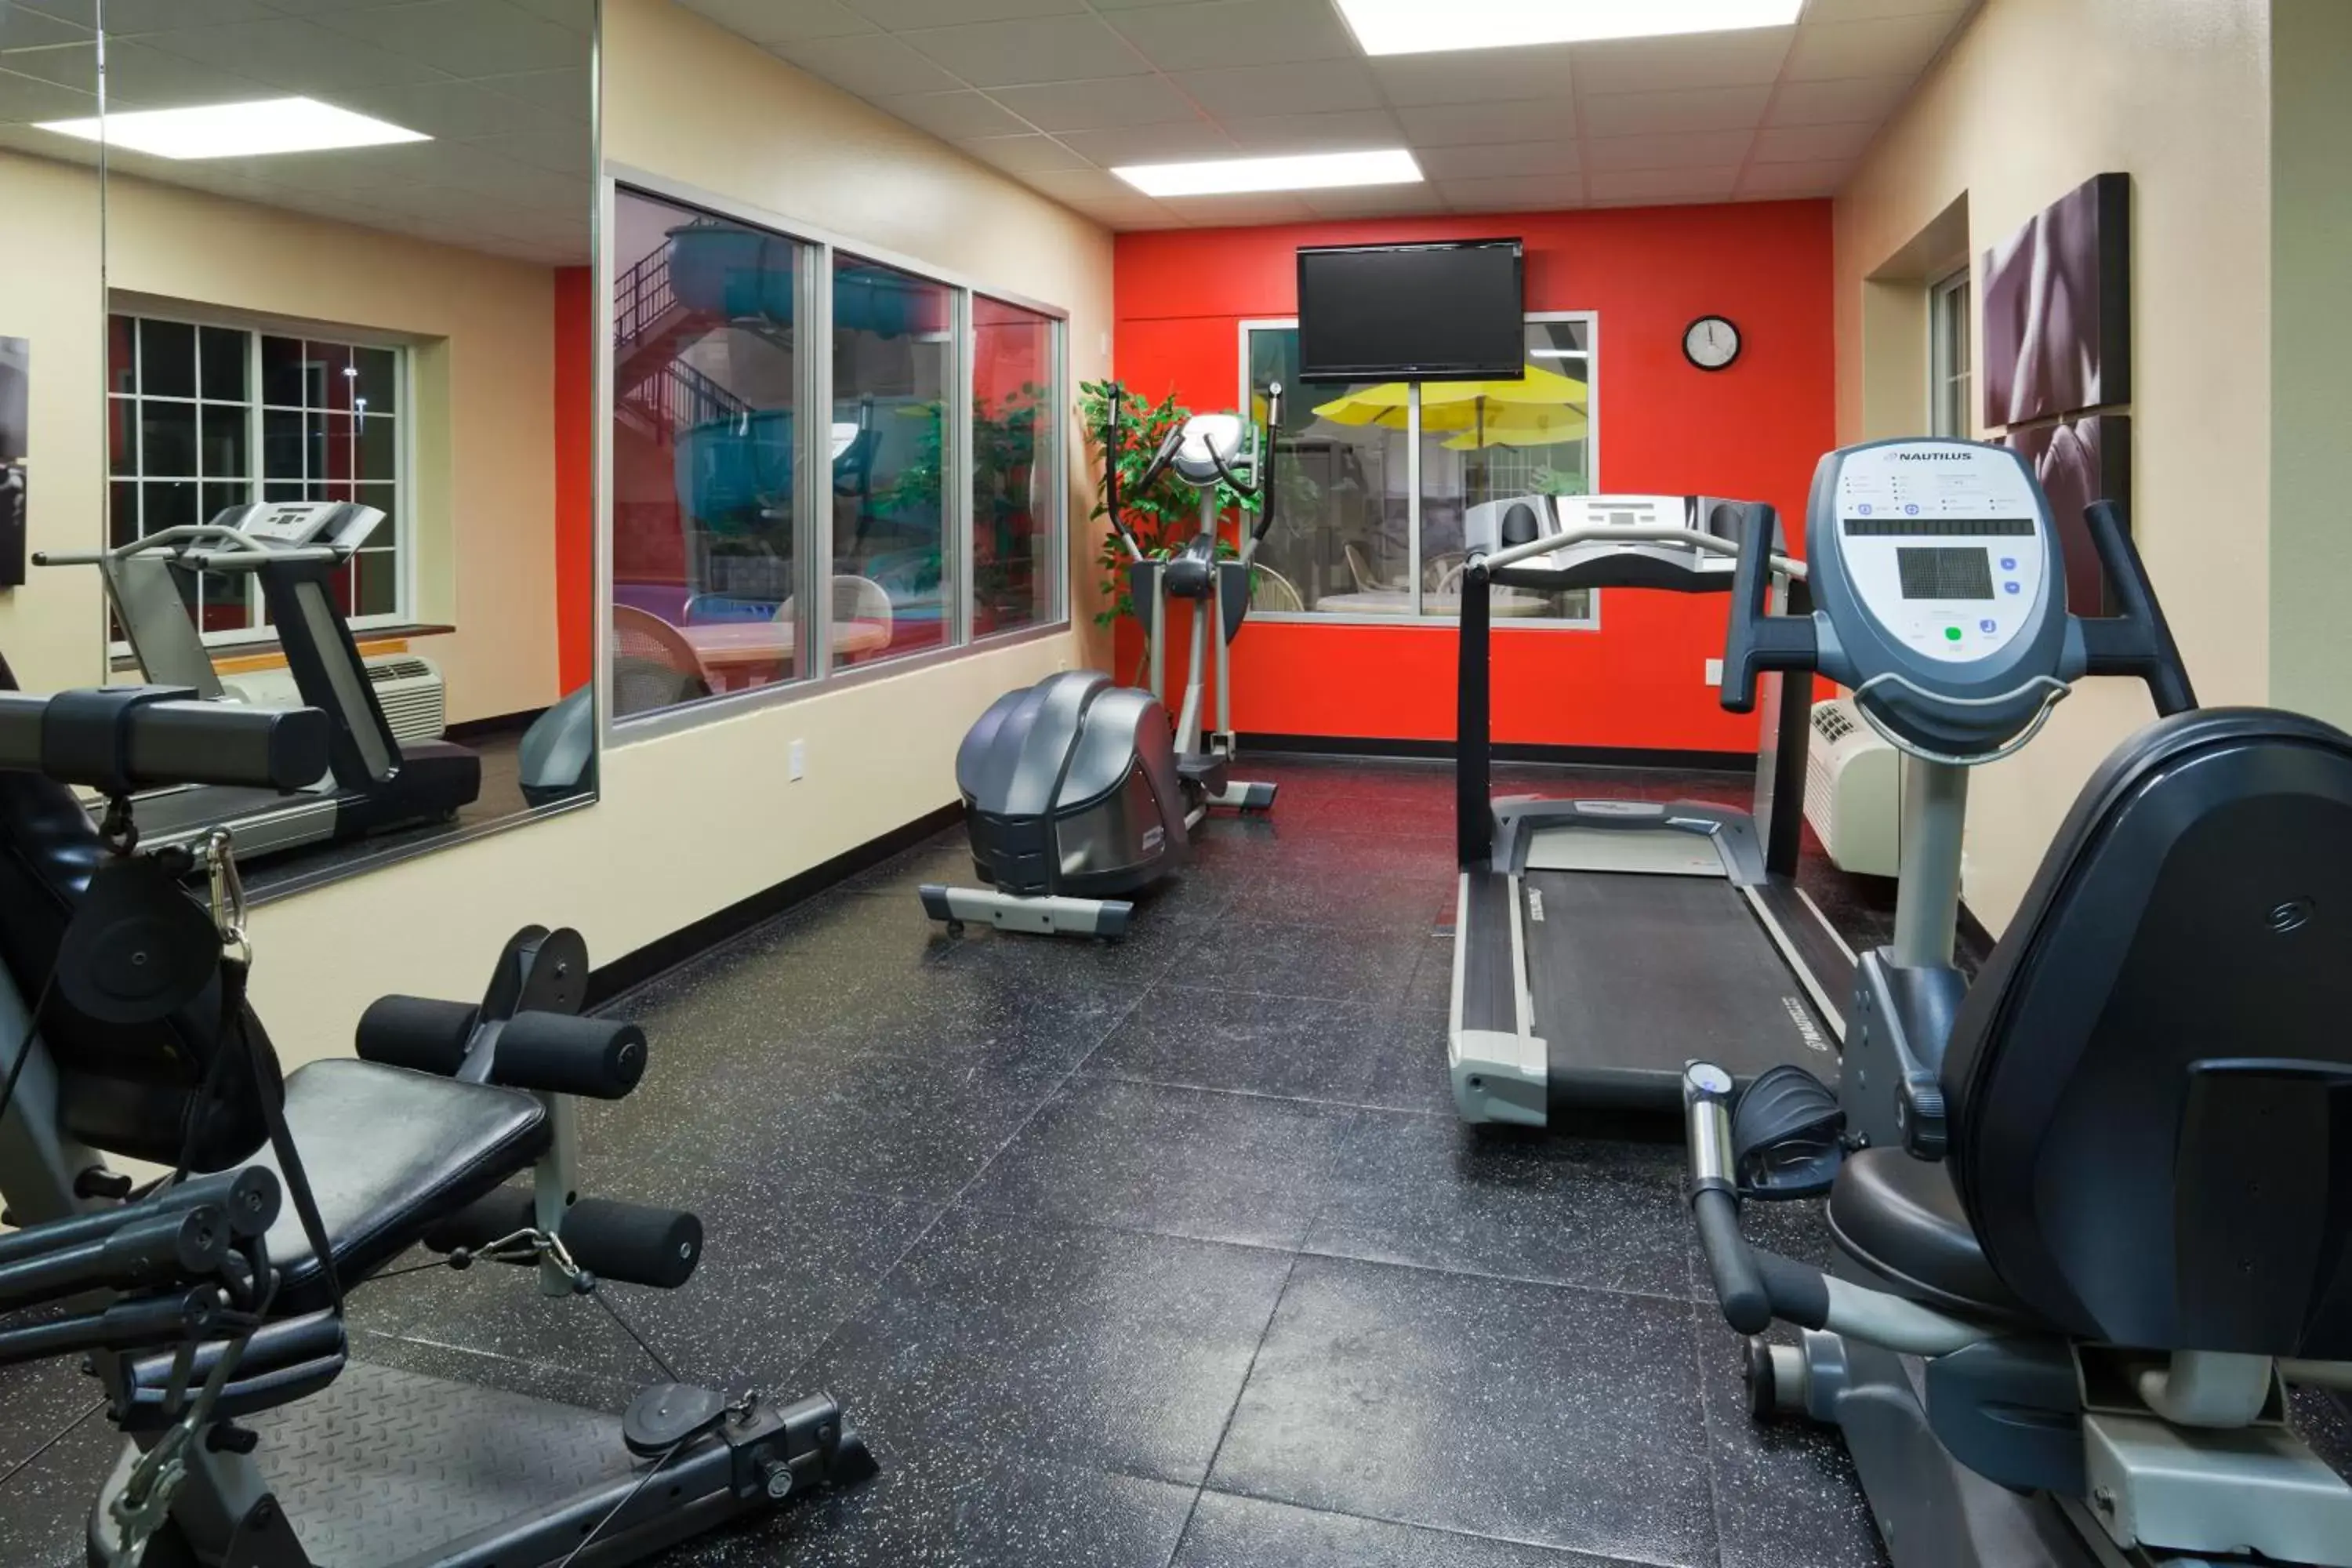 Fitness centre/facilities, Fitness Center/Facilities in Country Inn & Suites by Radisson, Bismarck, ND